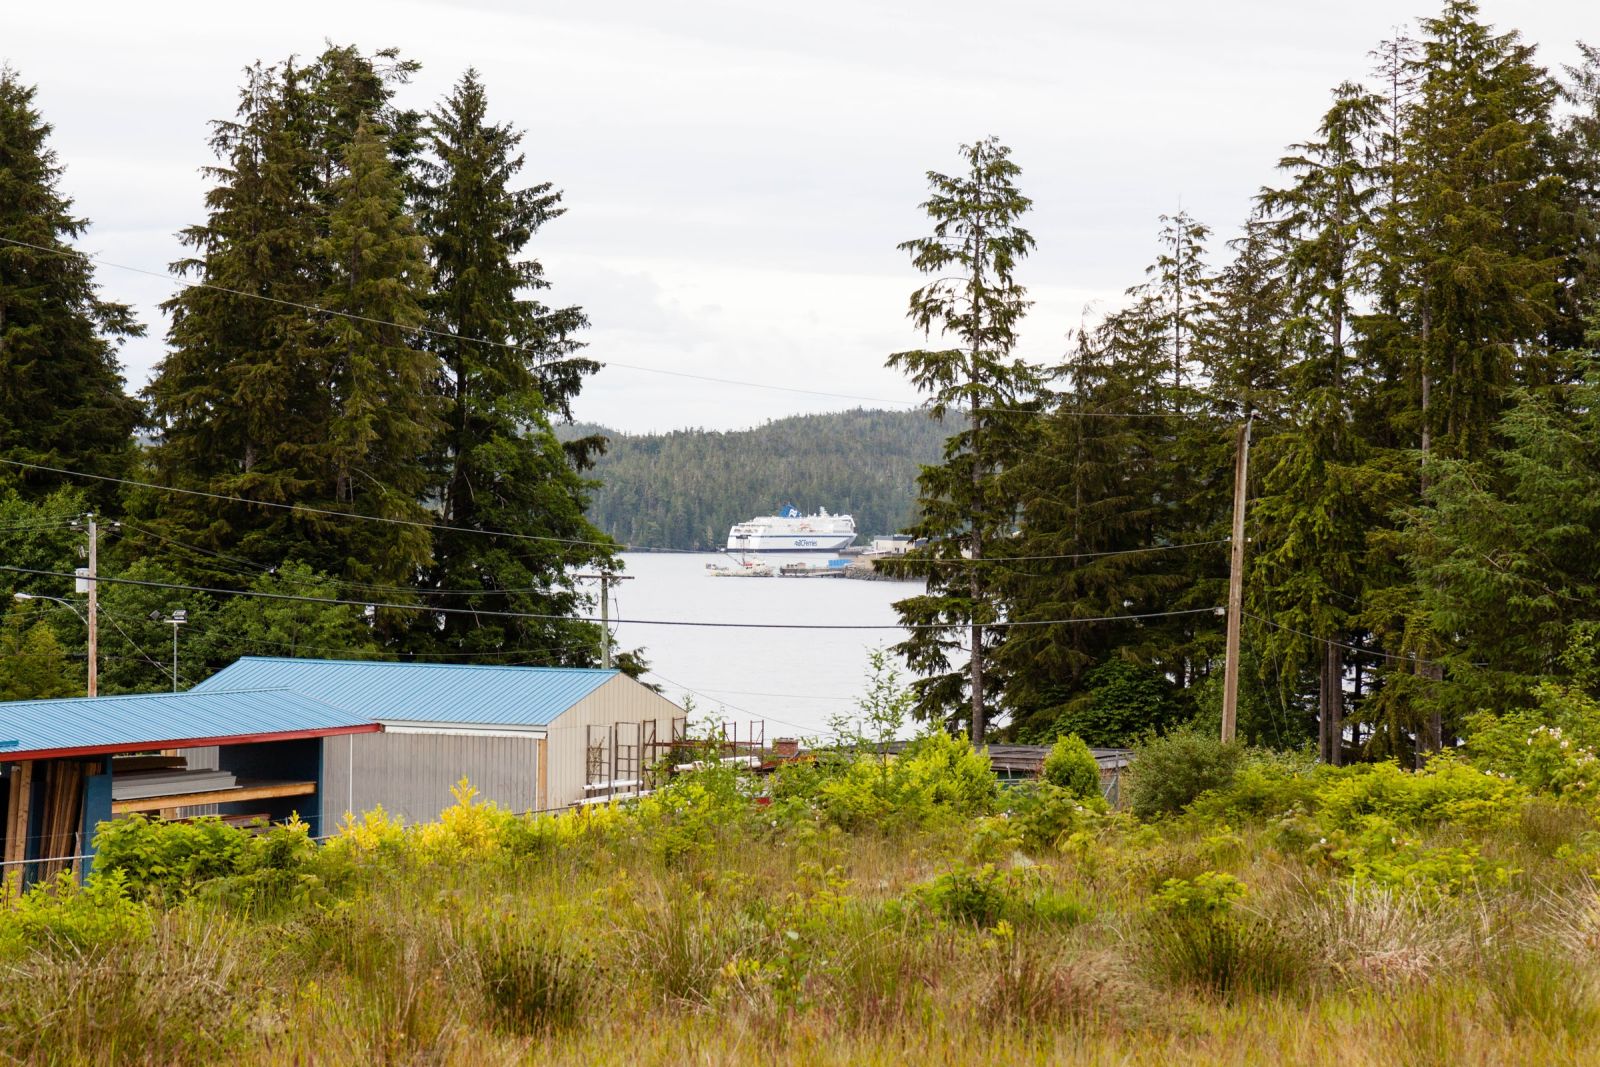 Looking at Bear Cove, the BC Ferries terminal for the Inside Passage routes. It is supposed to be a spectacular trip, more of a cruise than a mere ferry ride. I hope I have a chance to do it sometime.